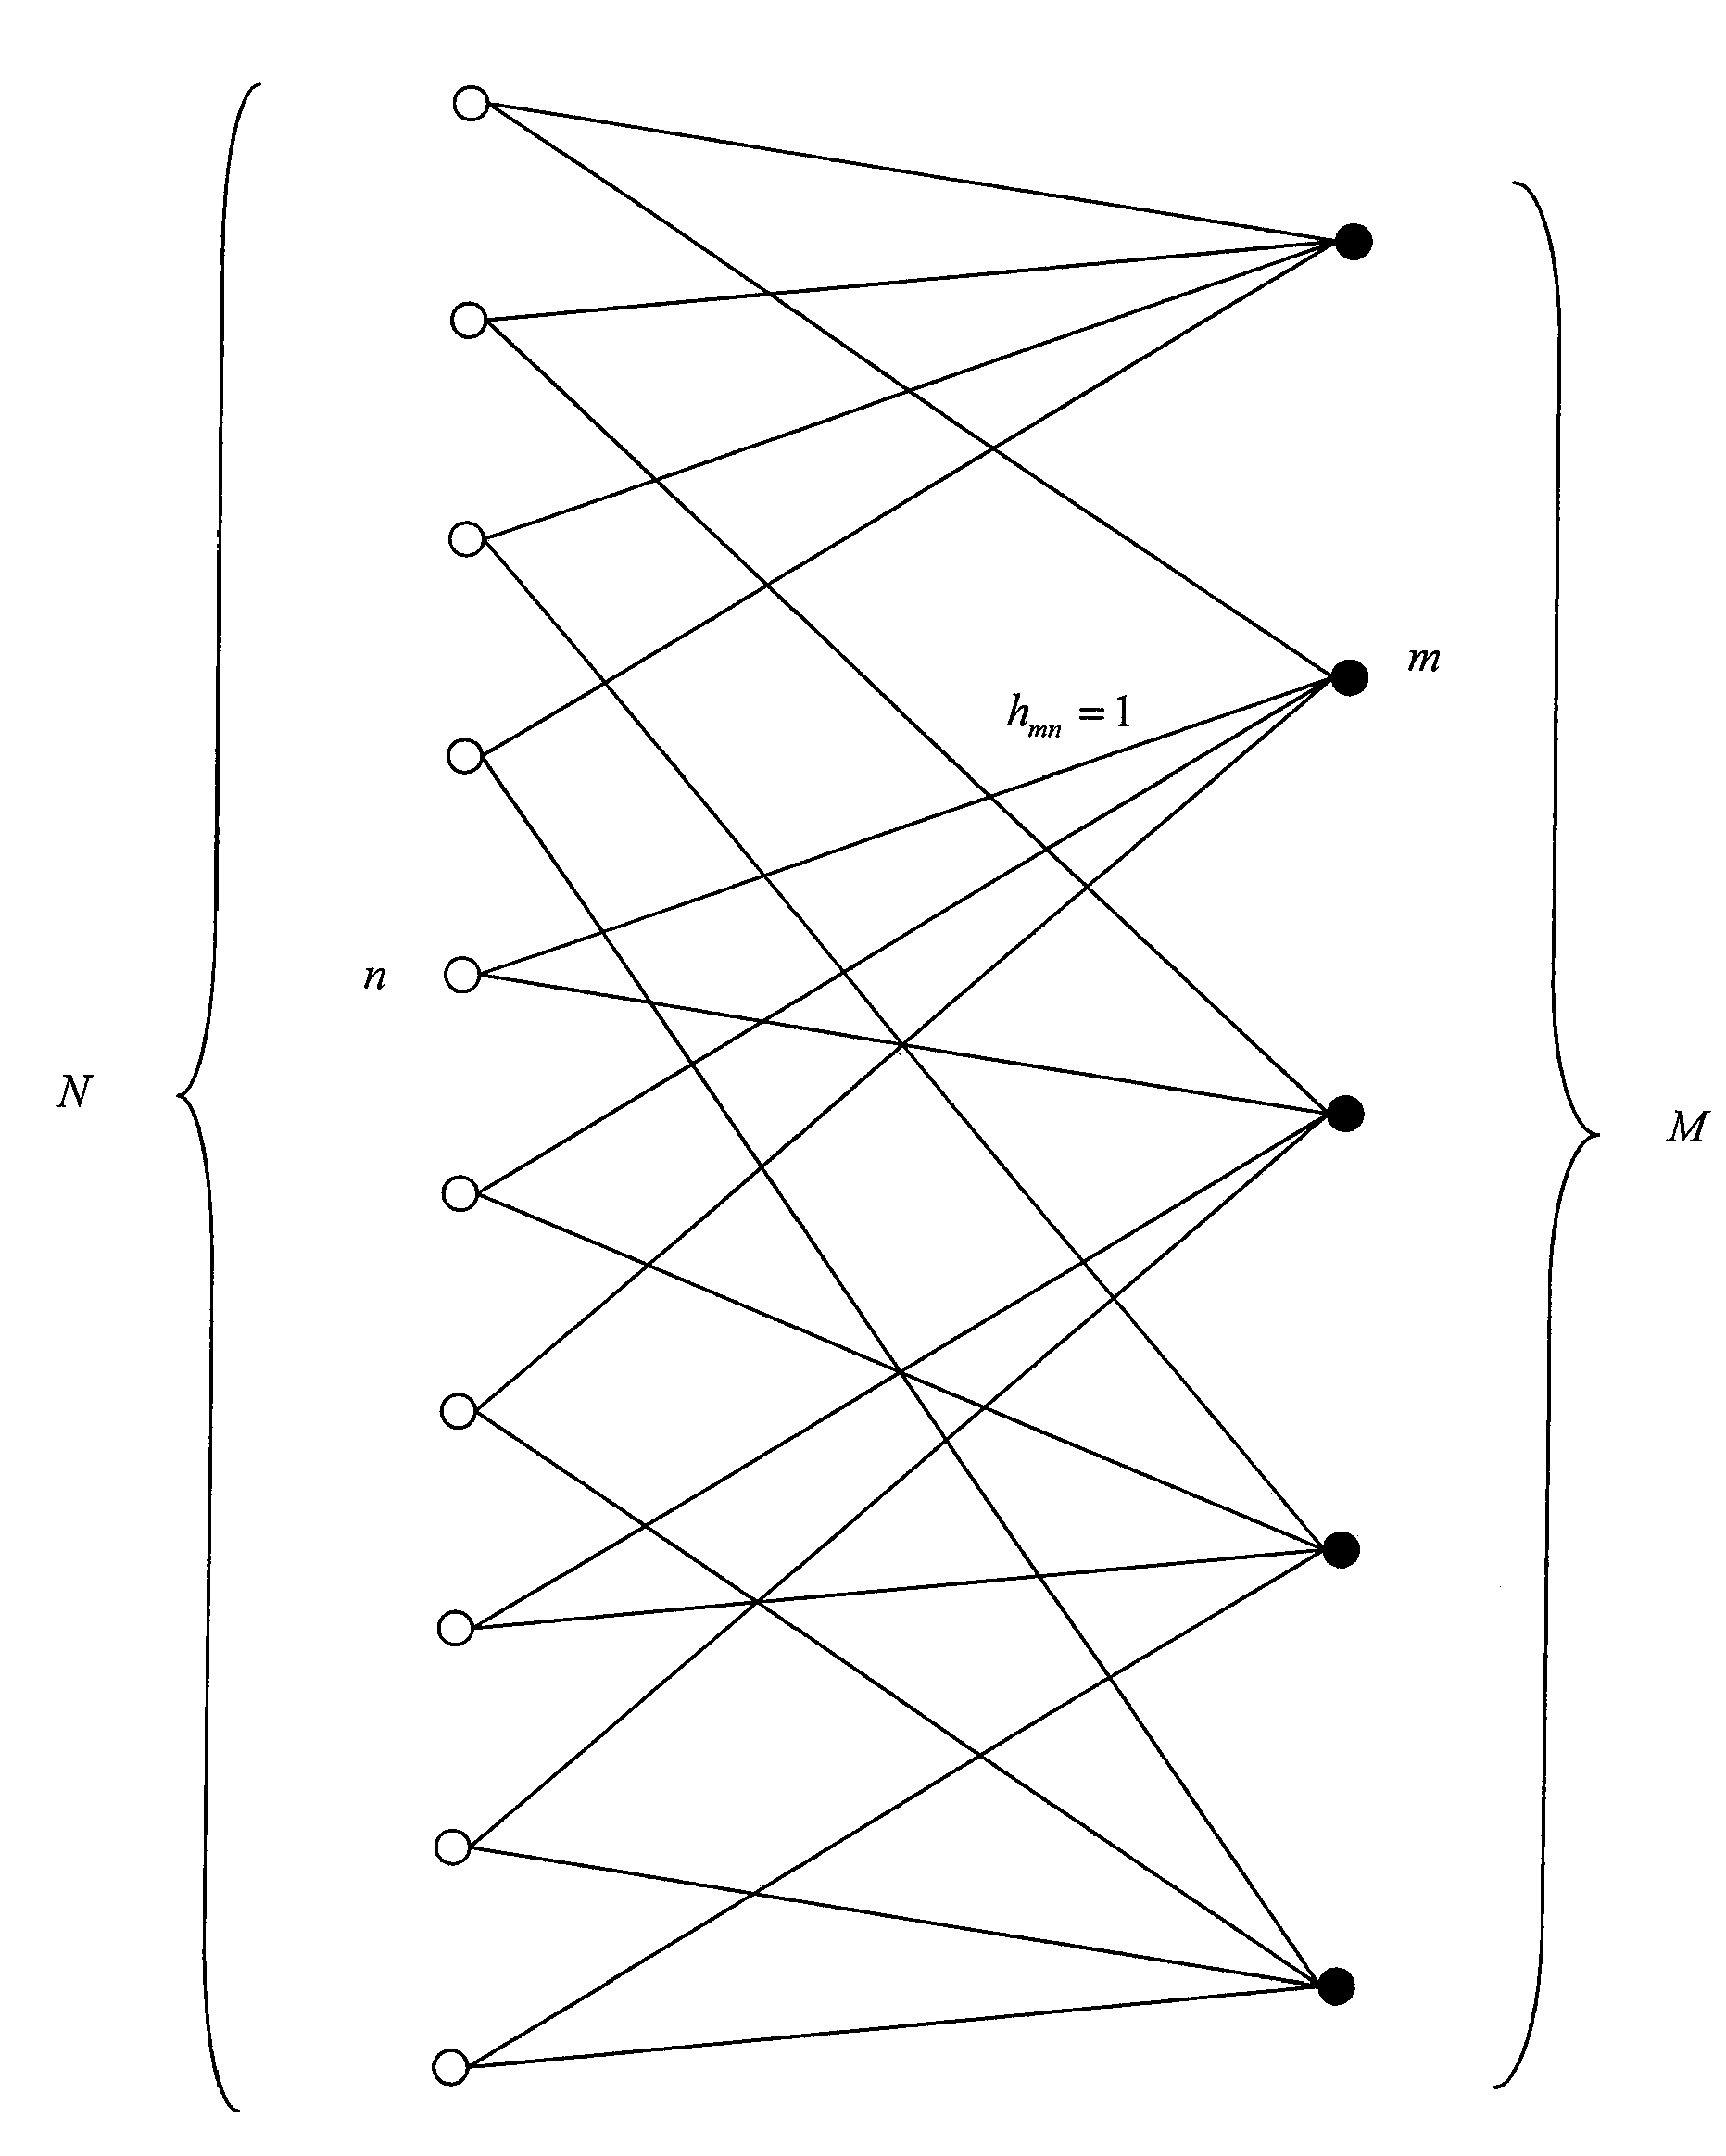 Method of decoding by message passing with scheduling depending on neighbourhood reliability